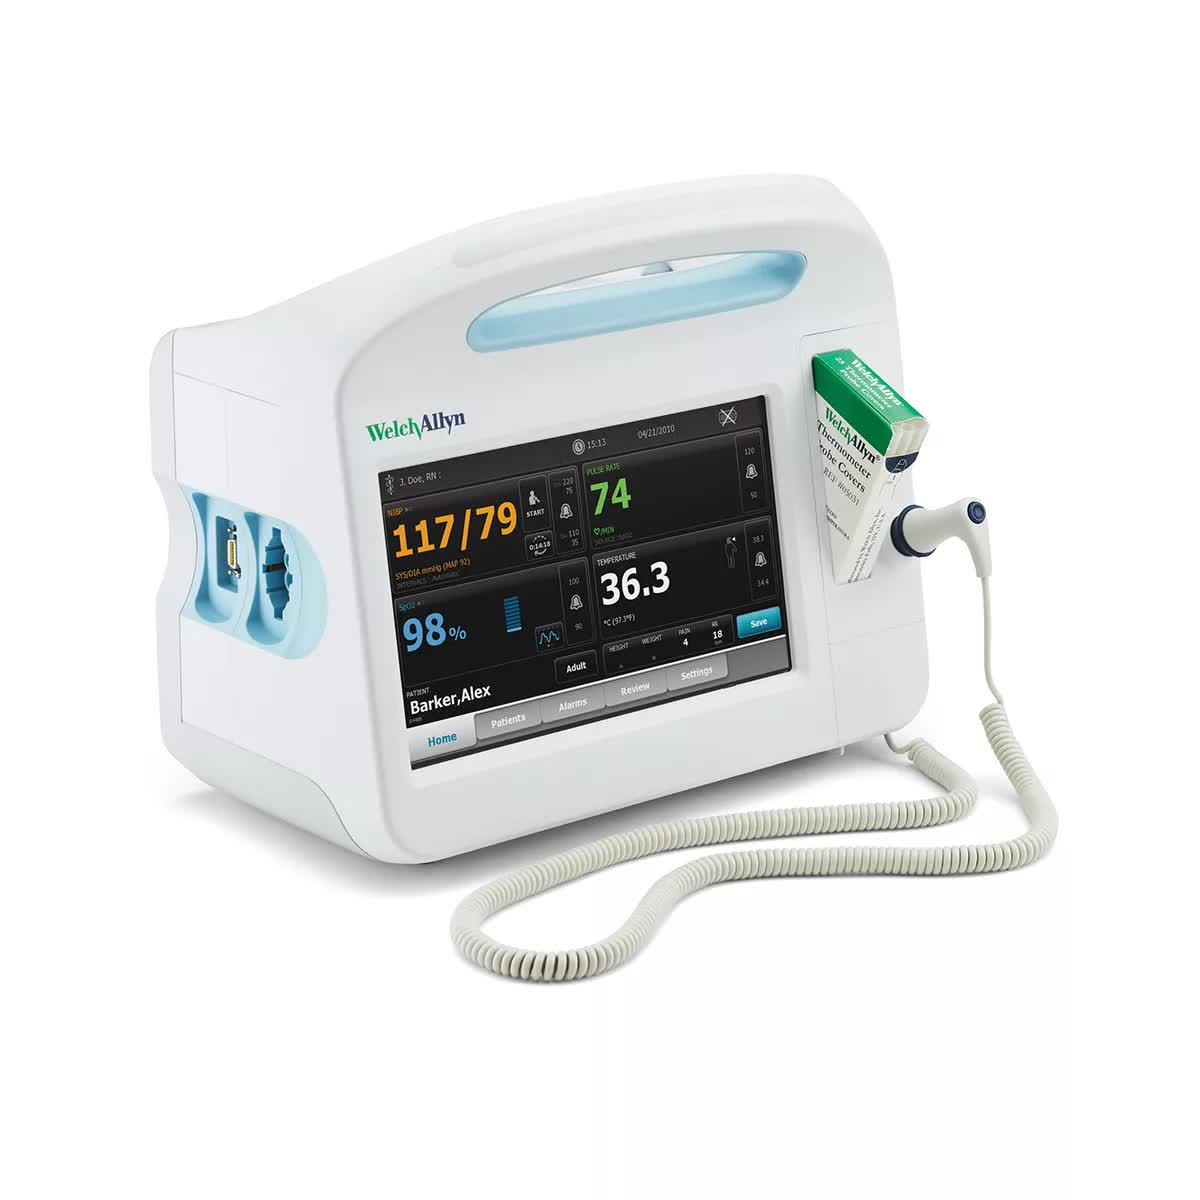 Welch Allyn Connex 6700 Series Vital Signs Monitor with Masimo SpO2 and SureTemp Plus